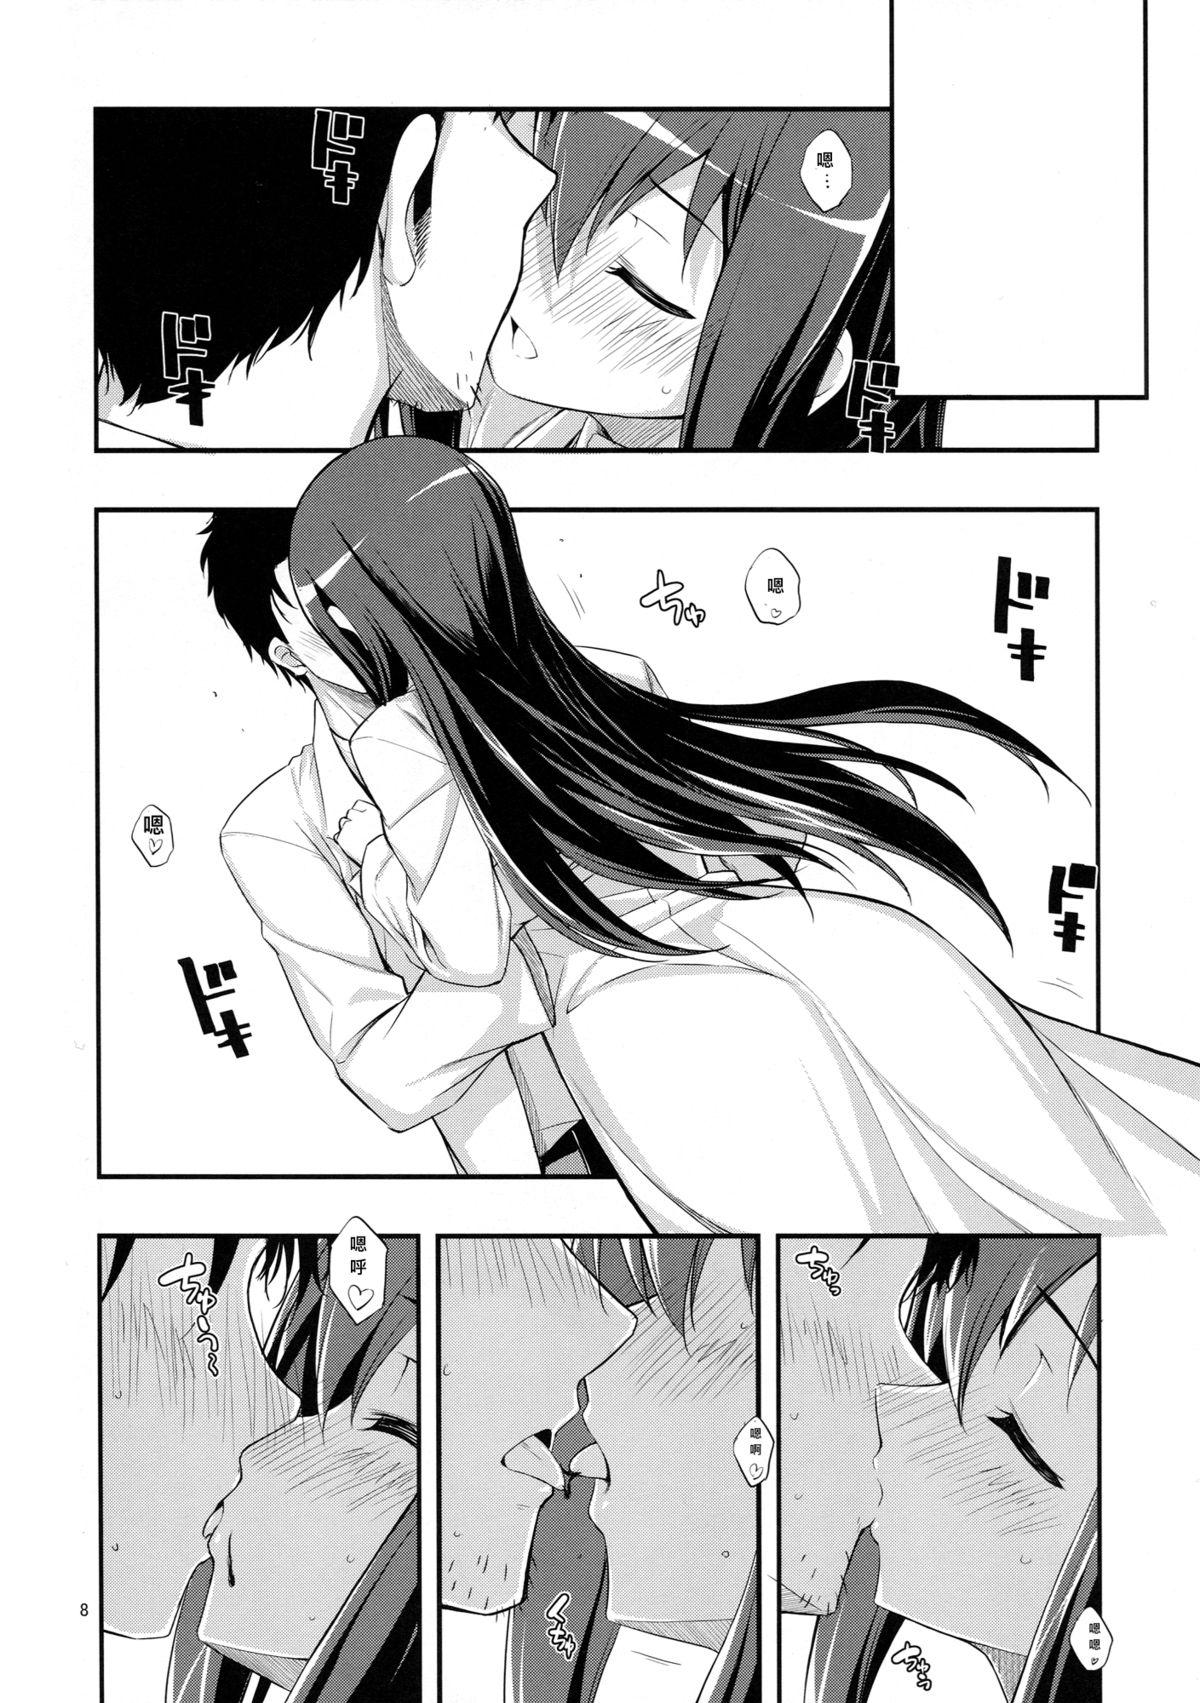 Highschool RE 14 - Steinsgate Girl On Girl - Page 8